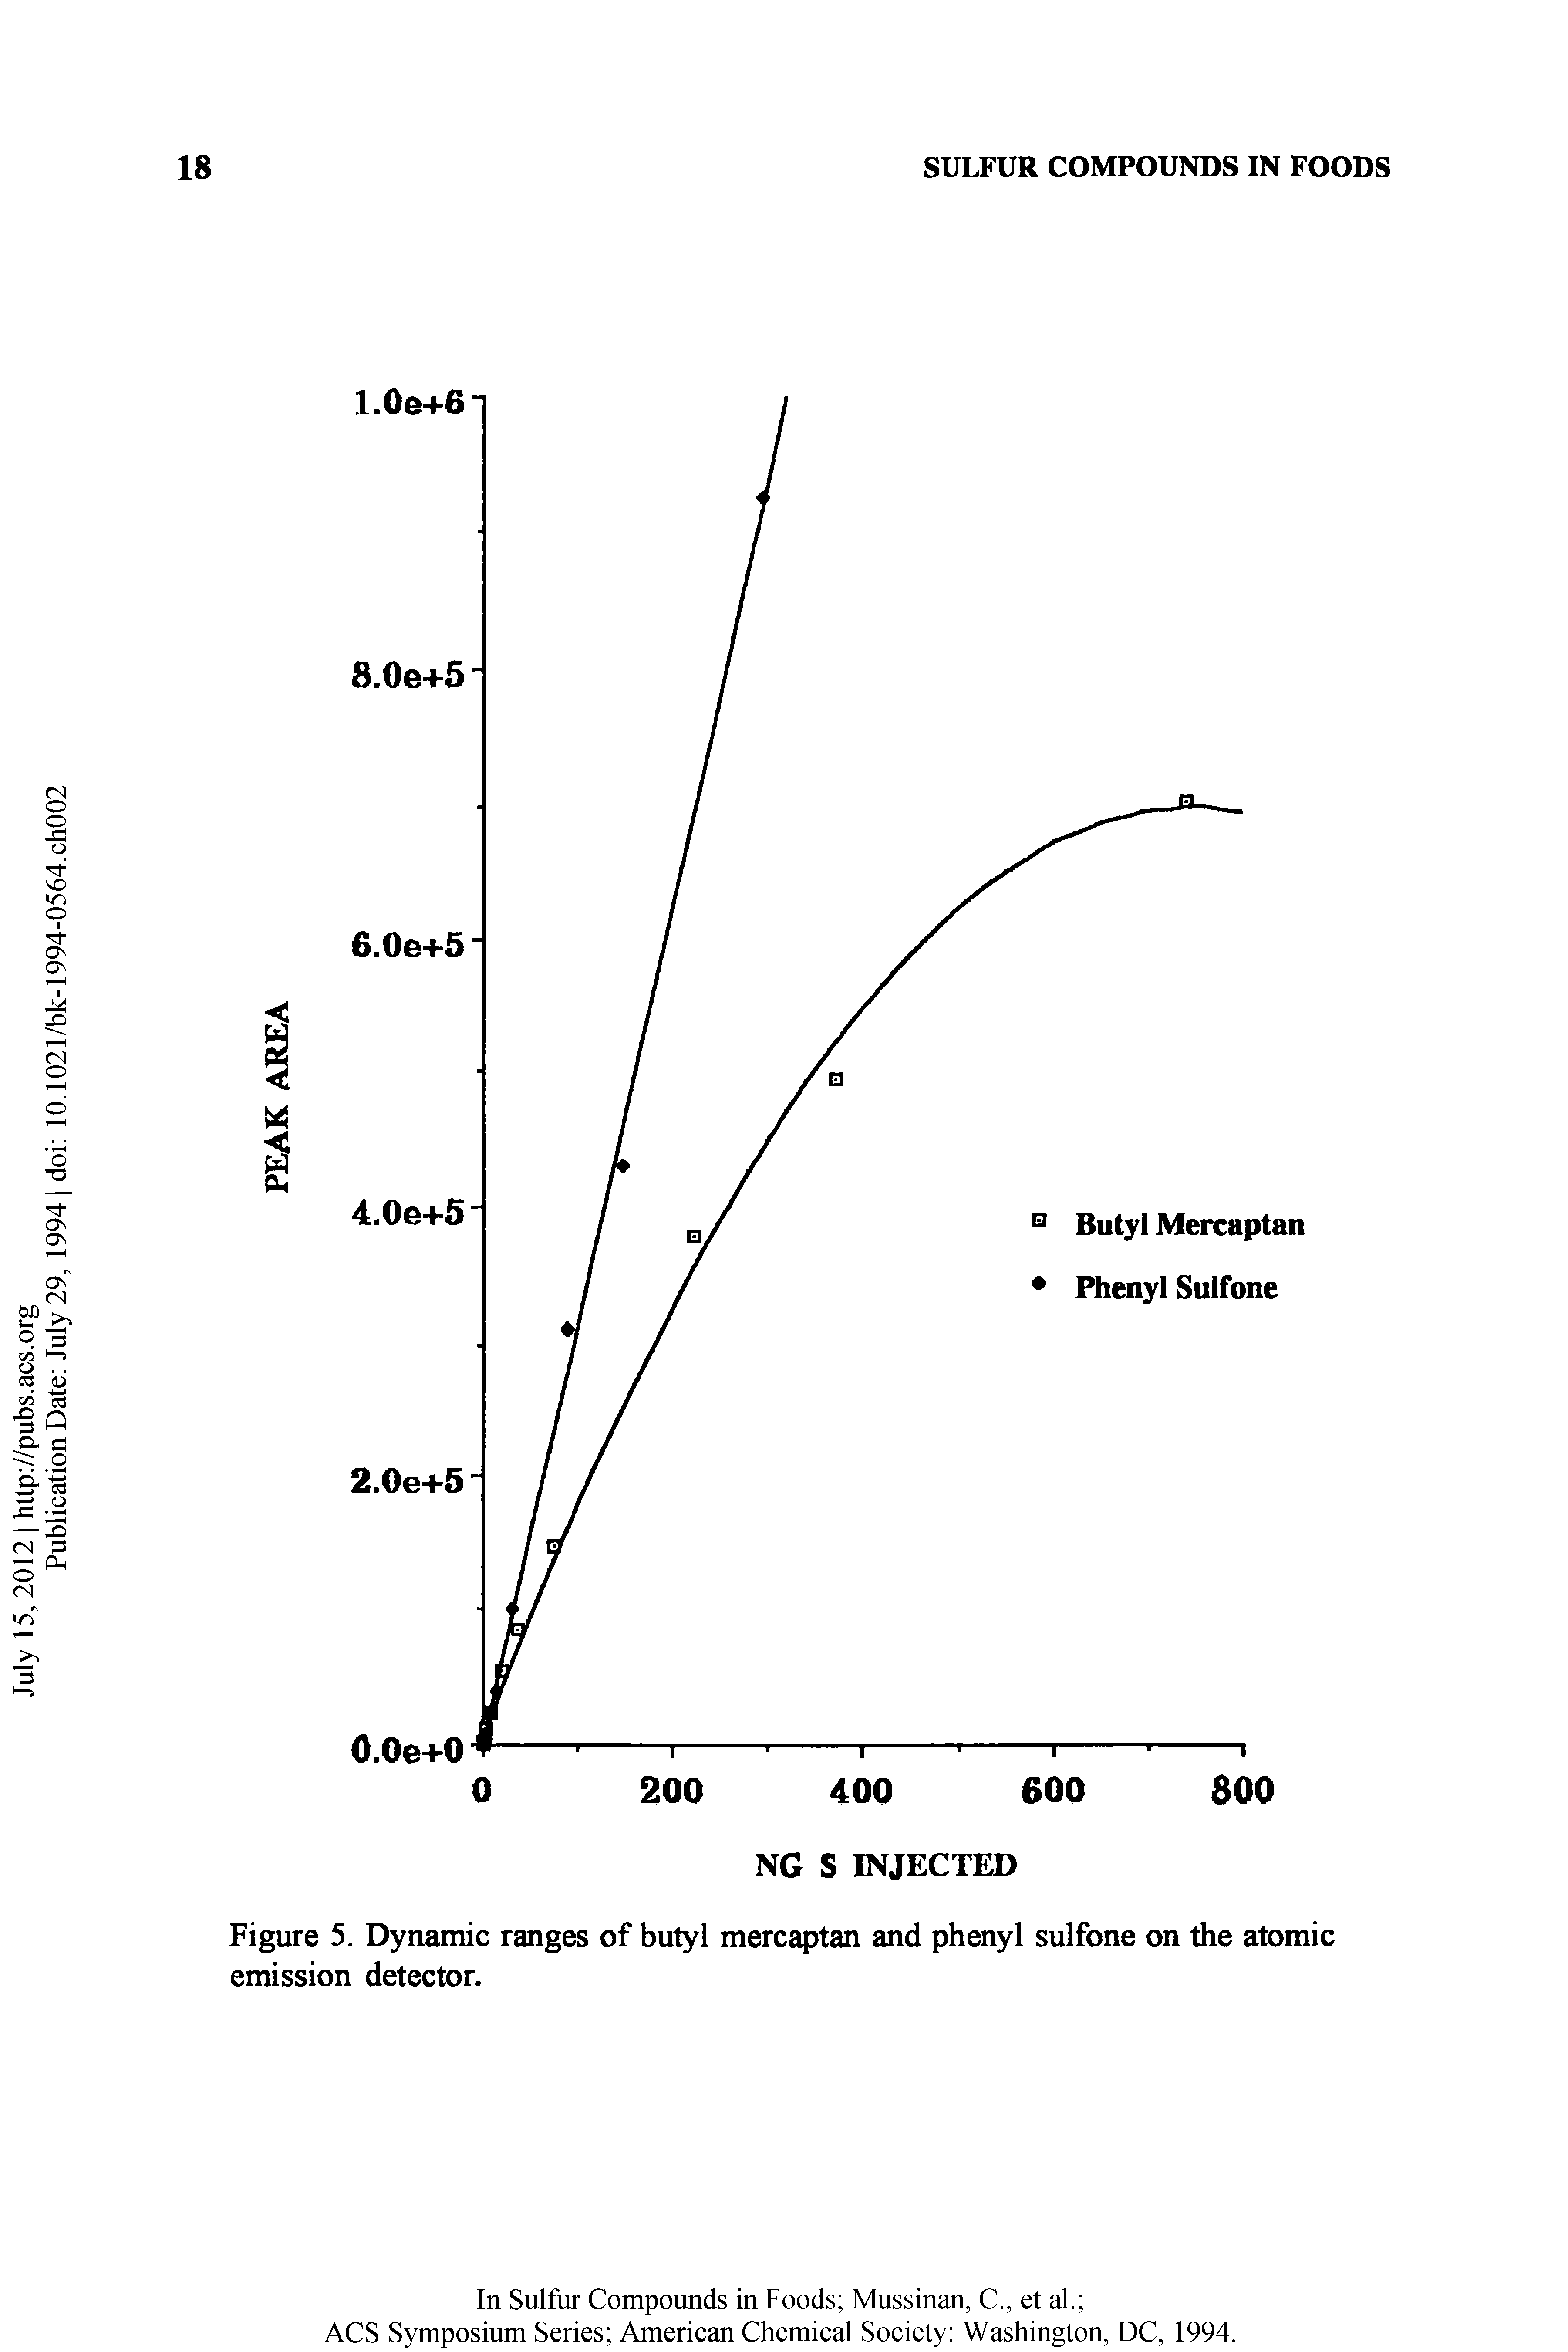 Figure 5. Dynamic ranges of butyl mercaptan and phenyl sulfone on the atomic emission detector.